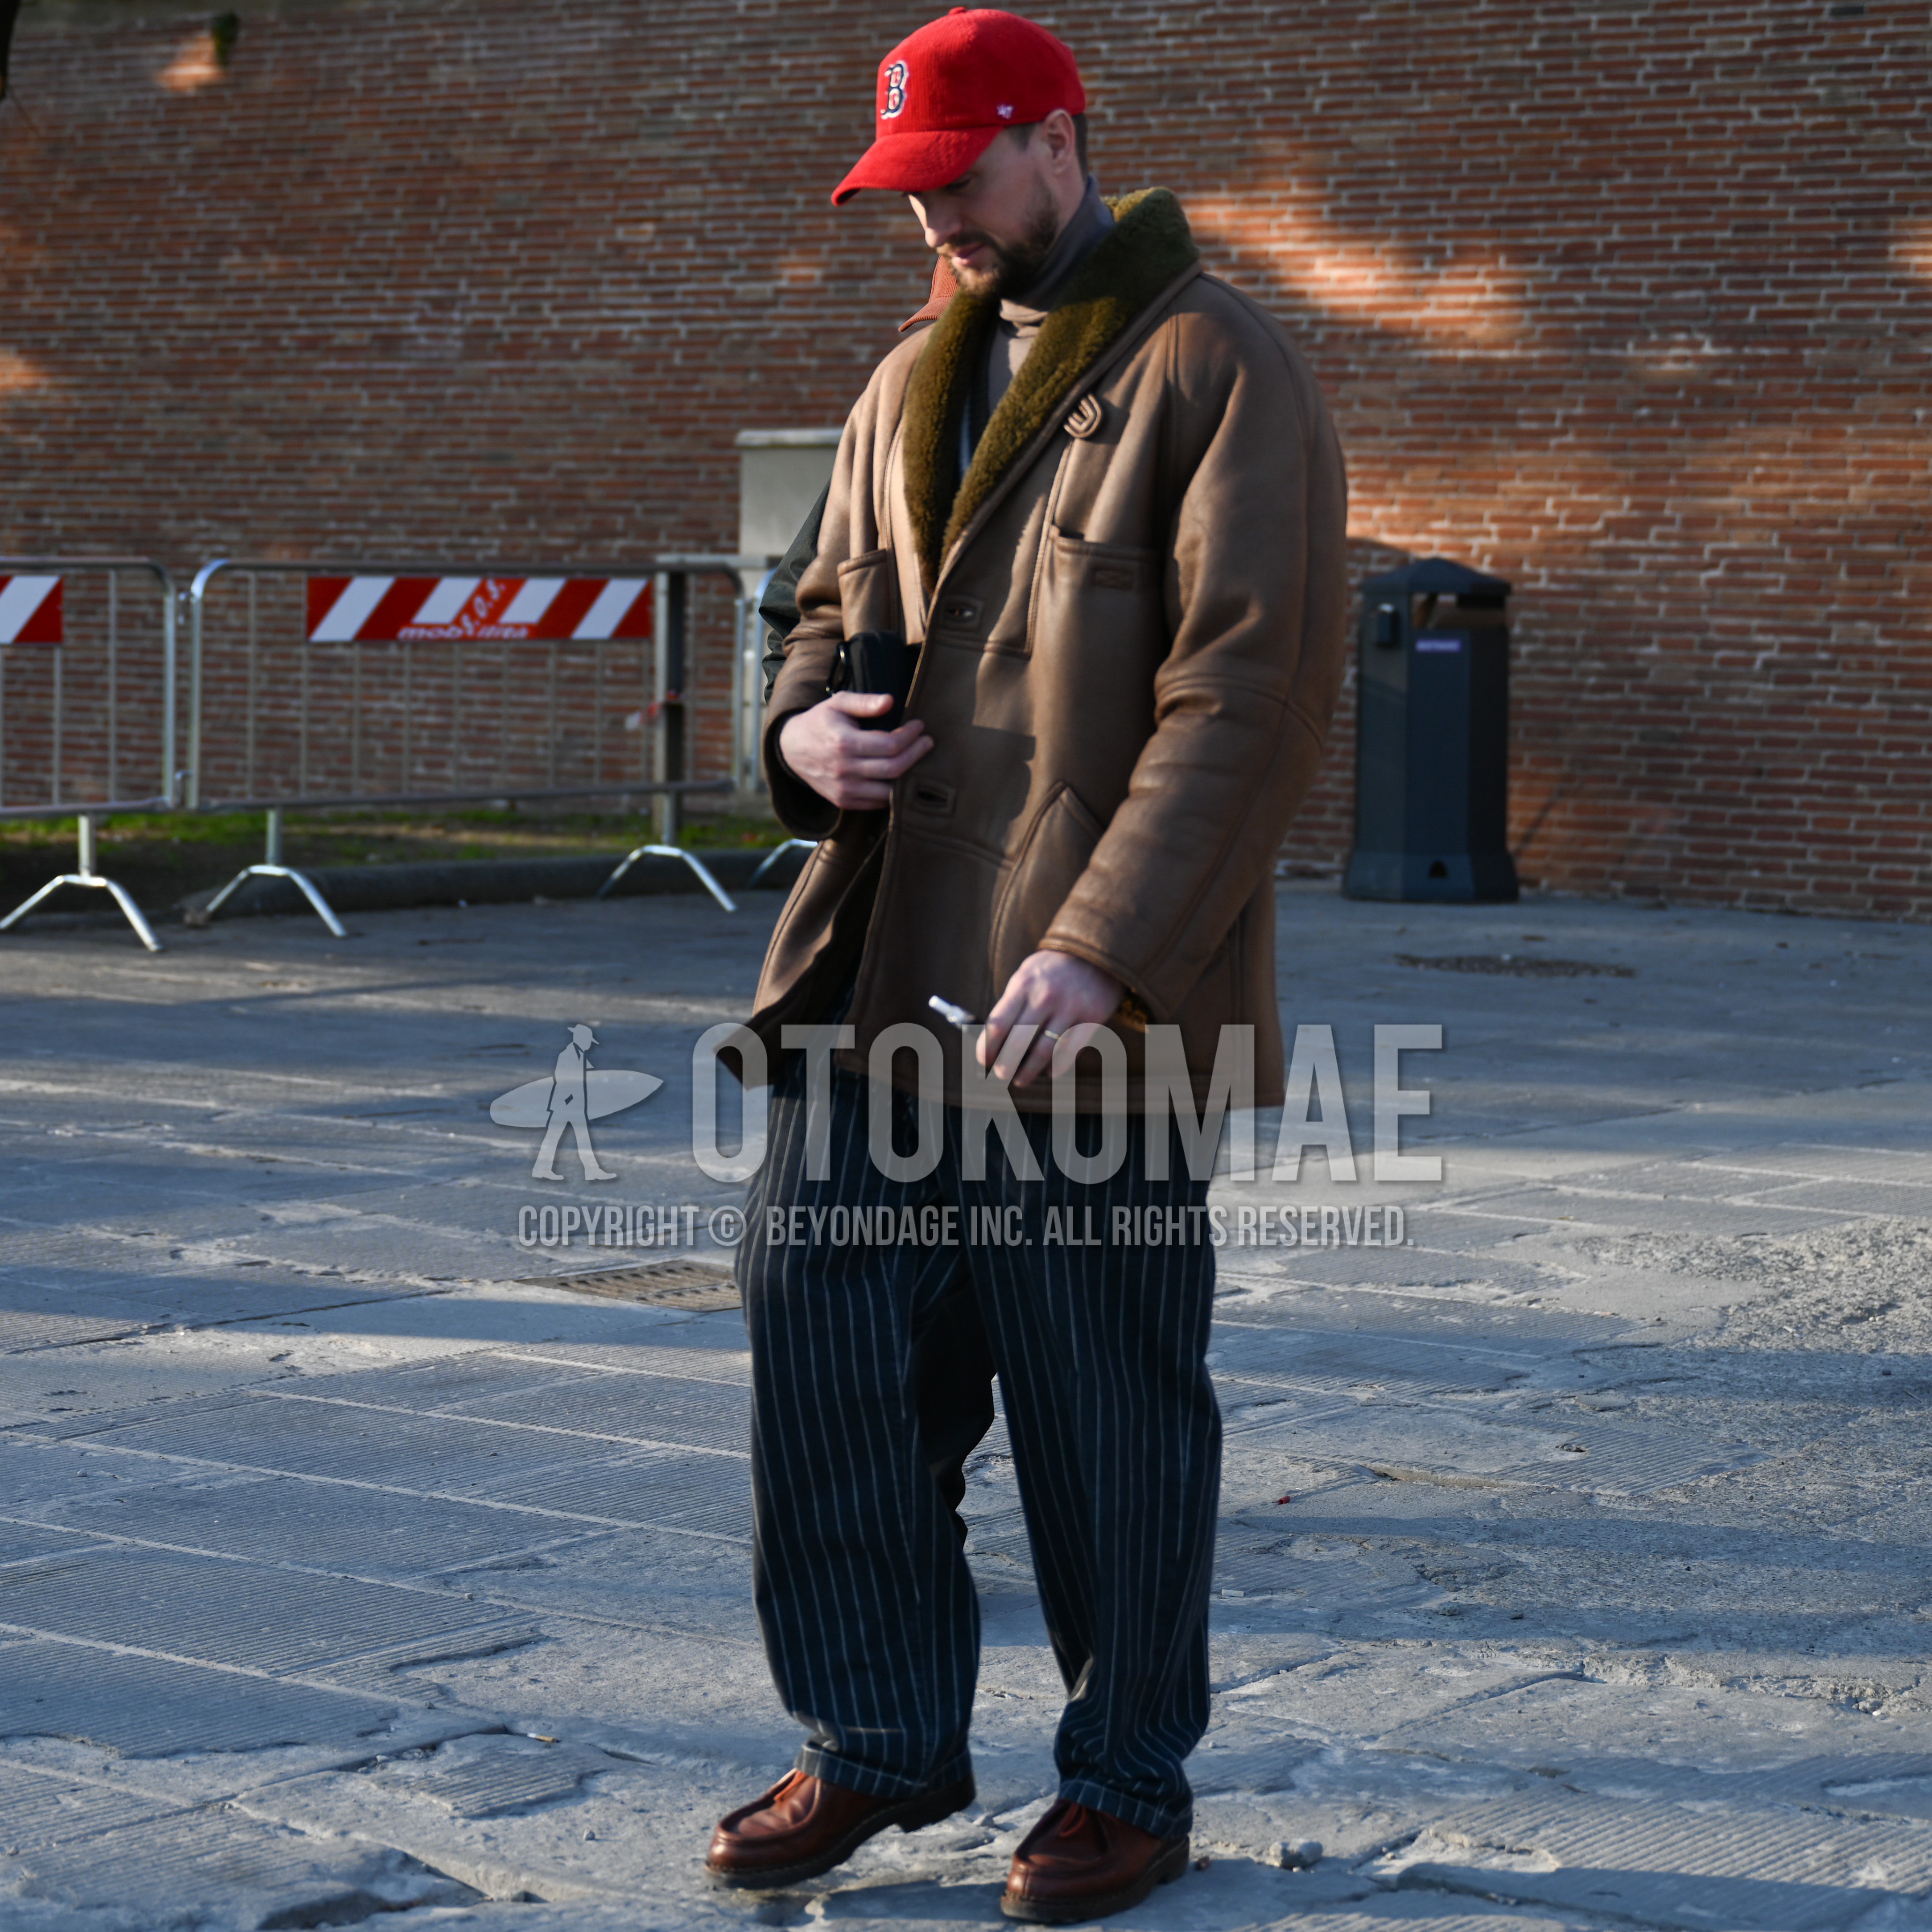 Men's autumn winter outfit with red one point baseball cap, brown outerwear, beige plain turtleneck knit, navy stripes slacks, brown  loafers leather shoes.